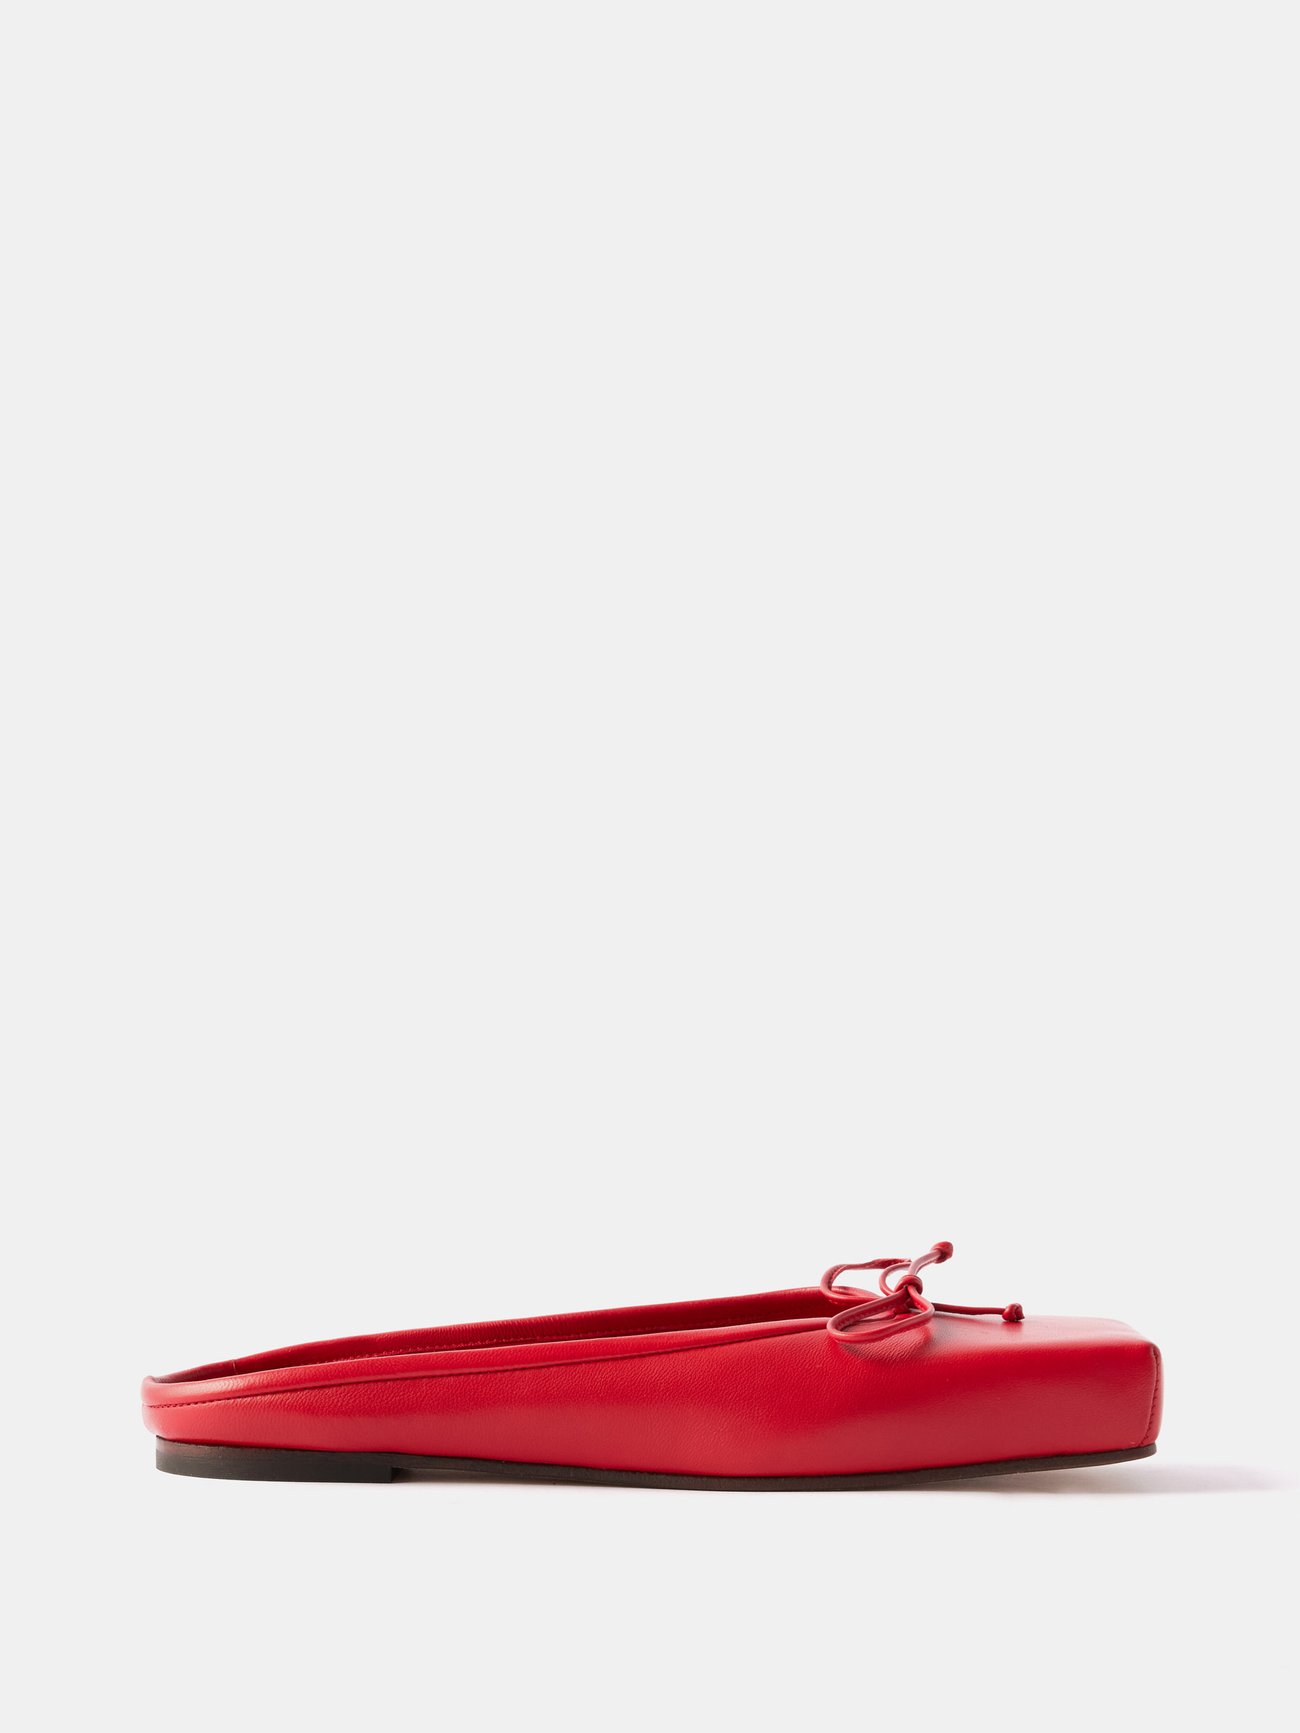 Shaped with a statement 3D squared toe, Jacquemus' Chouchou backless ballet flats are crafted from supple red leather and finessed with a dainty bow.